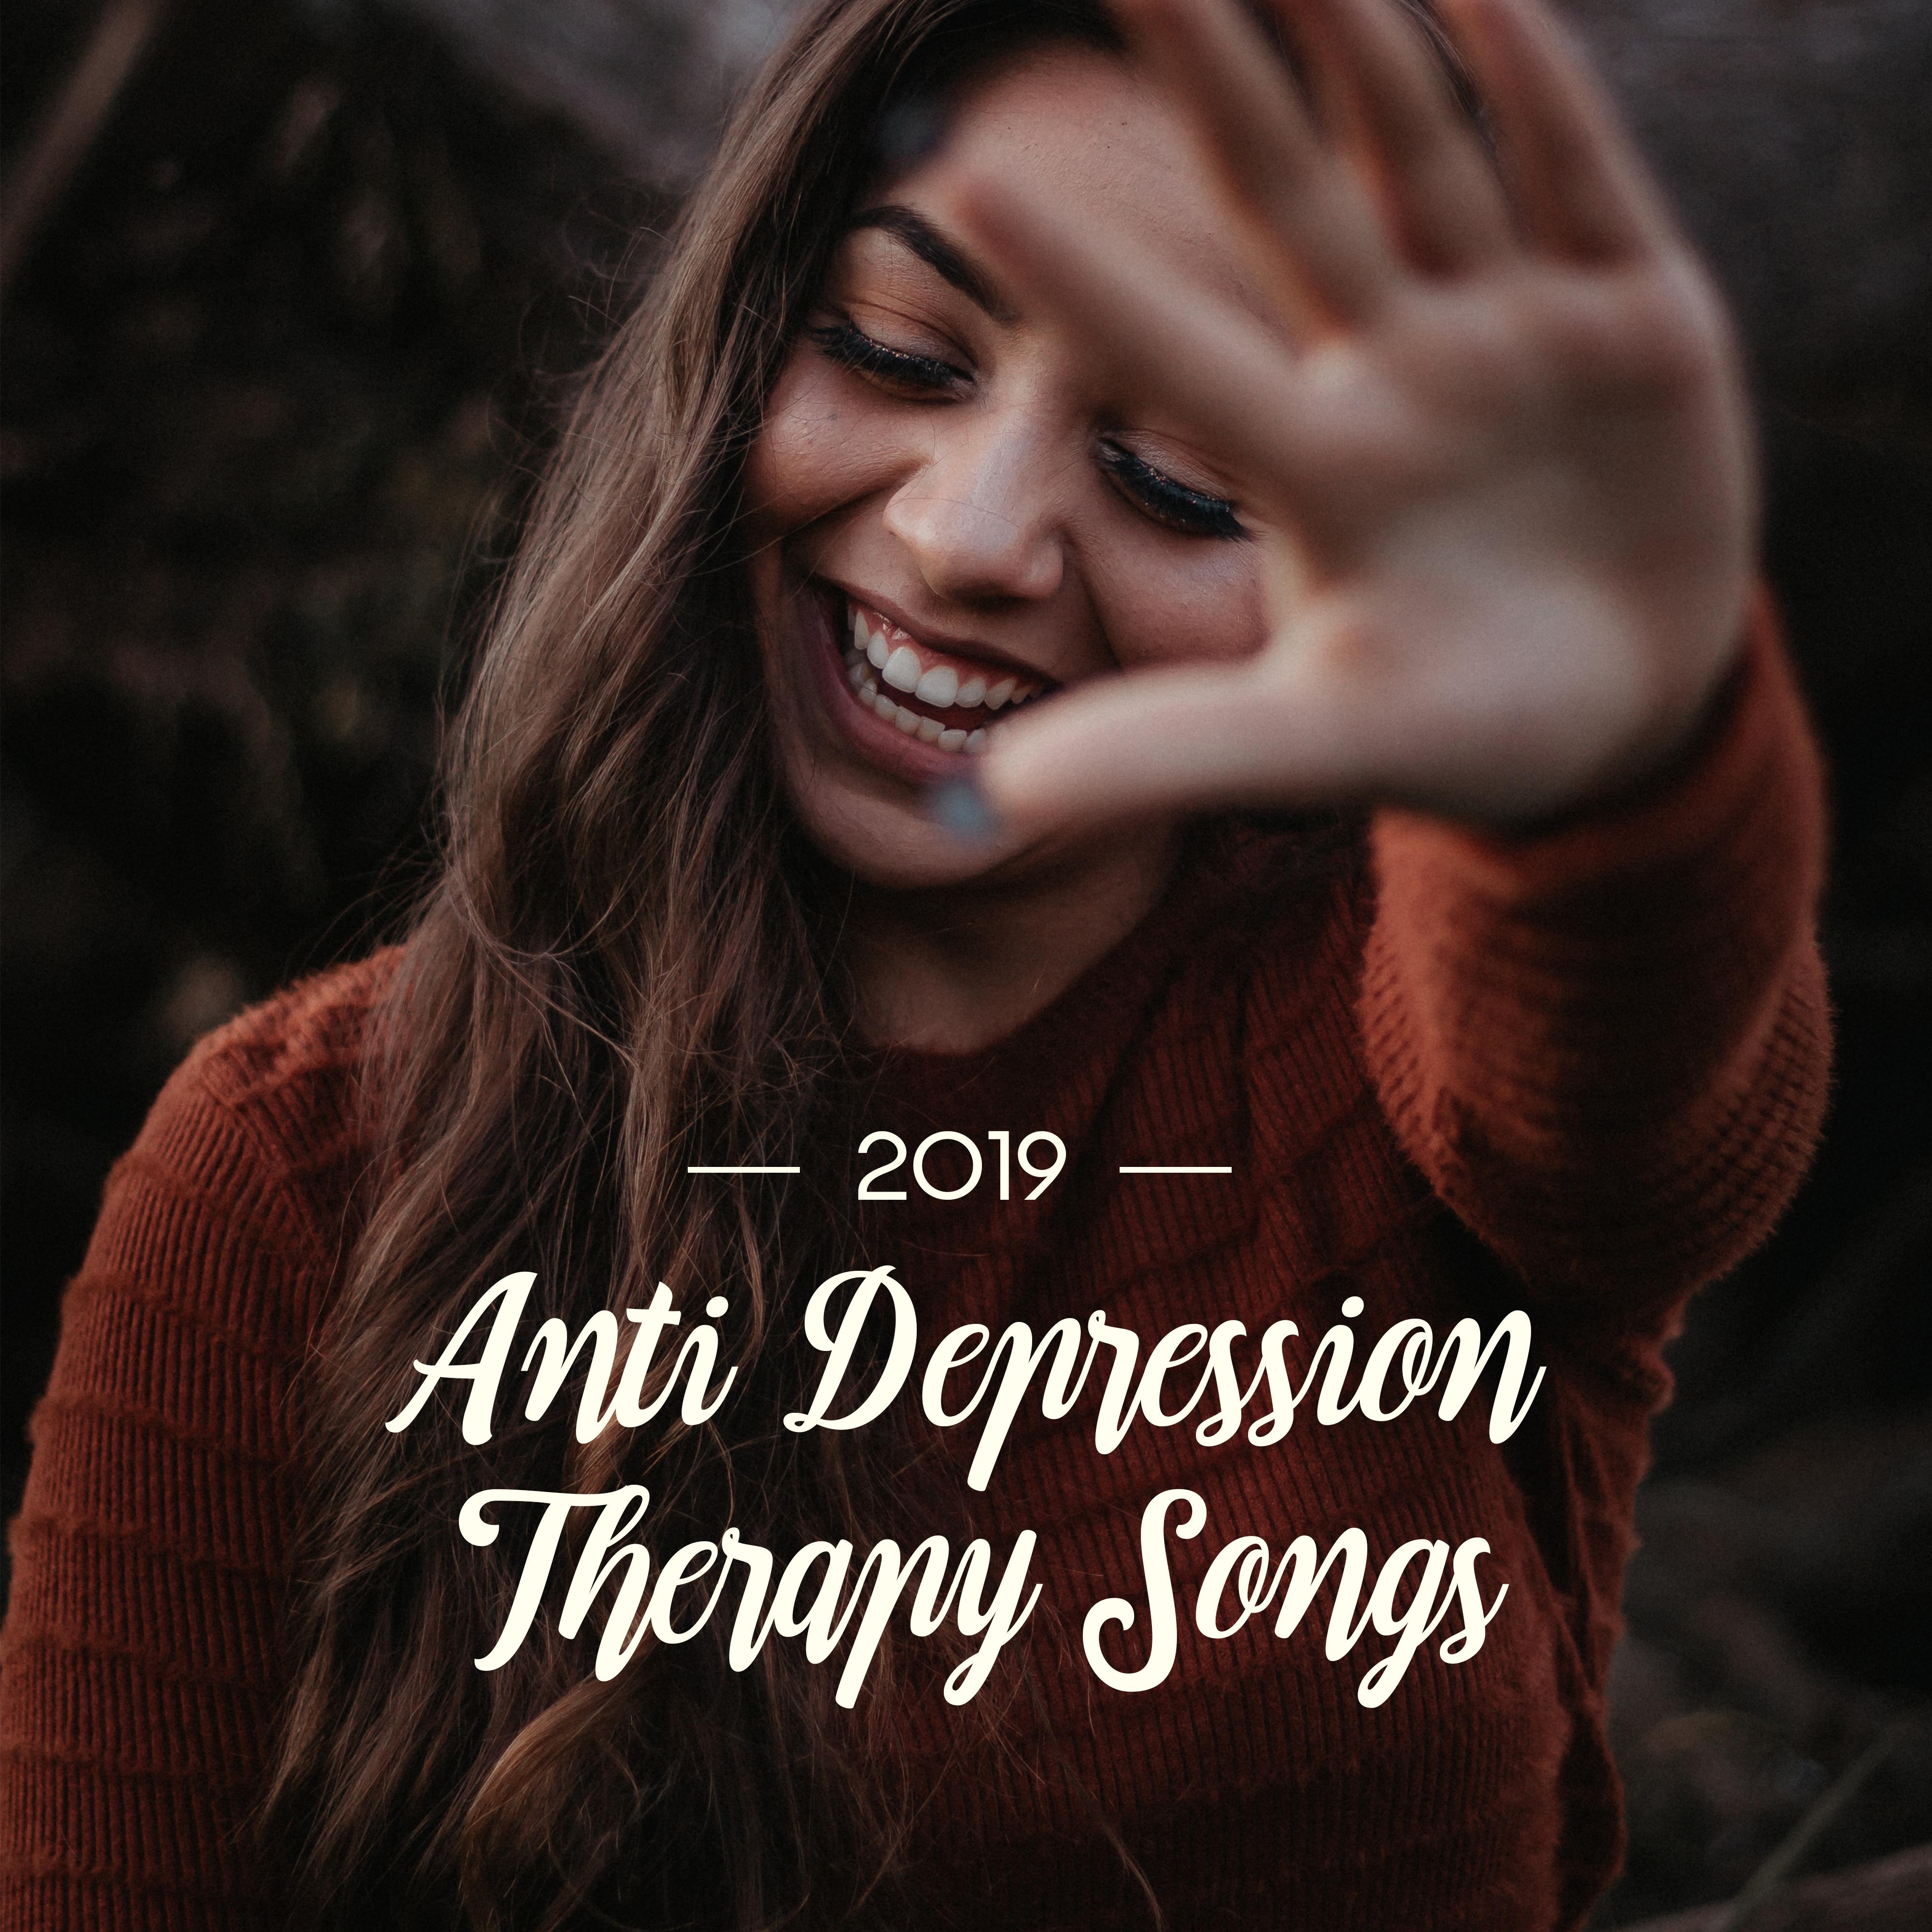 2019 Anti Depression Therapy Songs: Compilation of Best Nature & Piano New Age Music, Soothing Sounds for Relax, Fight with Bad Thoughts, Calm Down & Rest